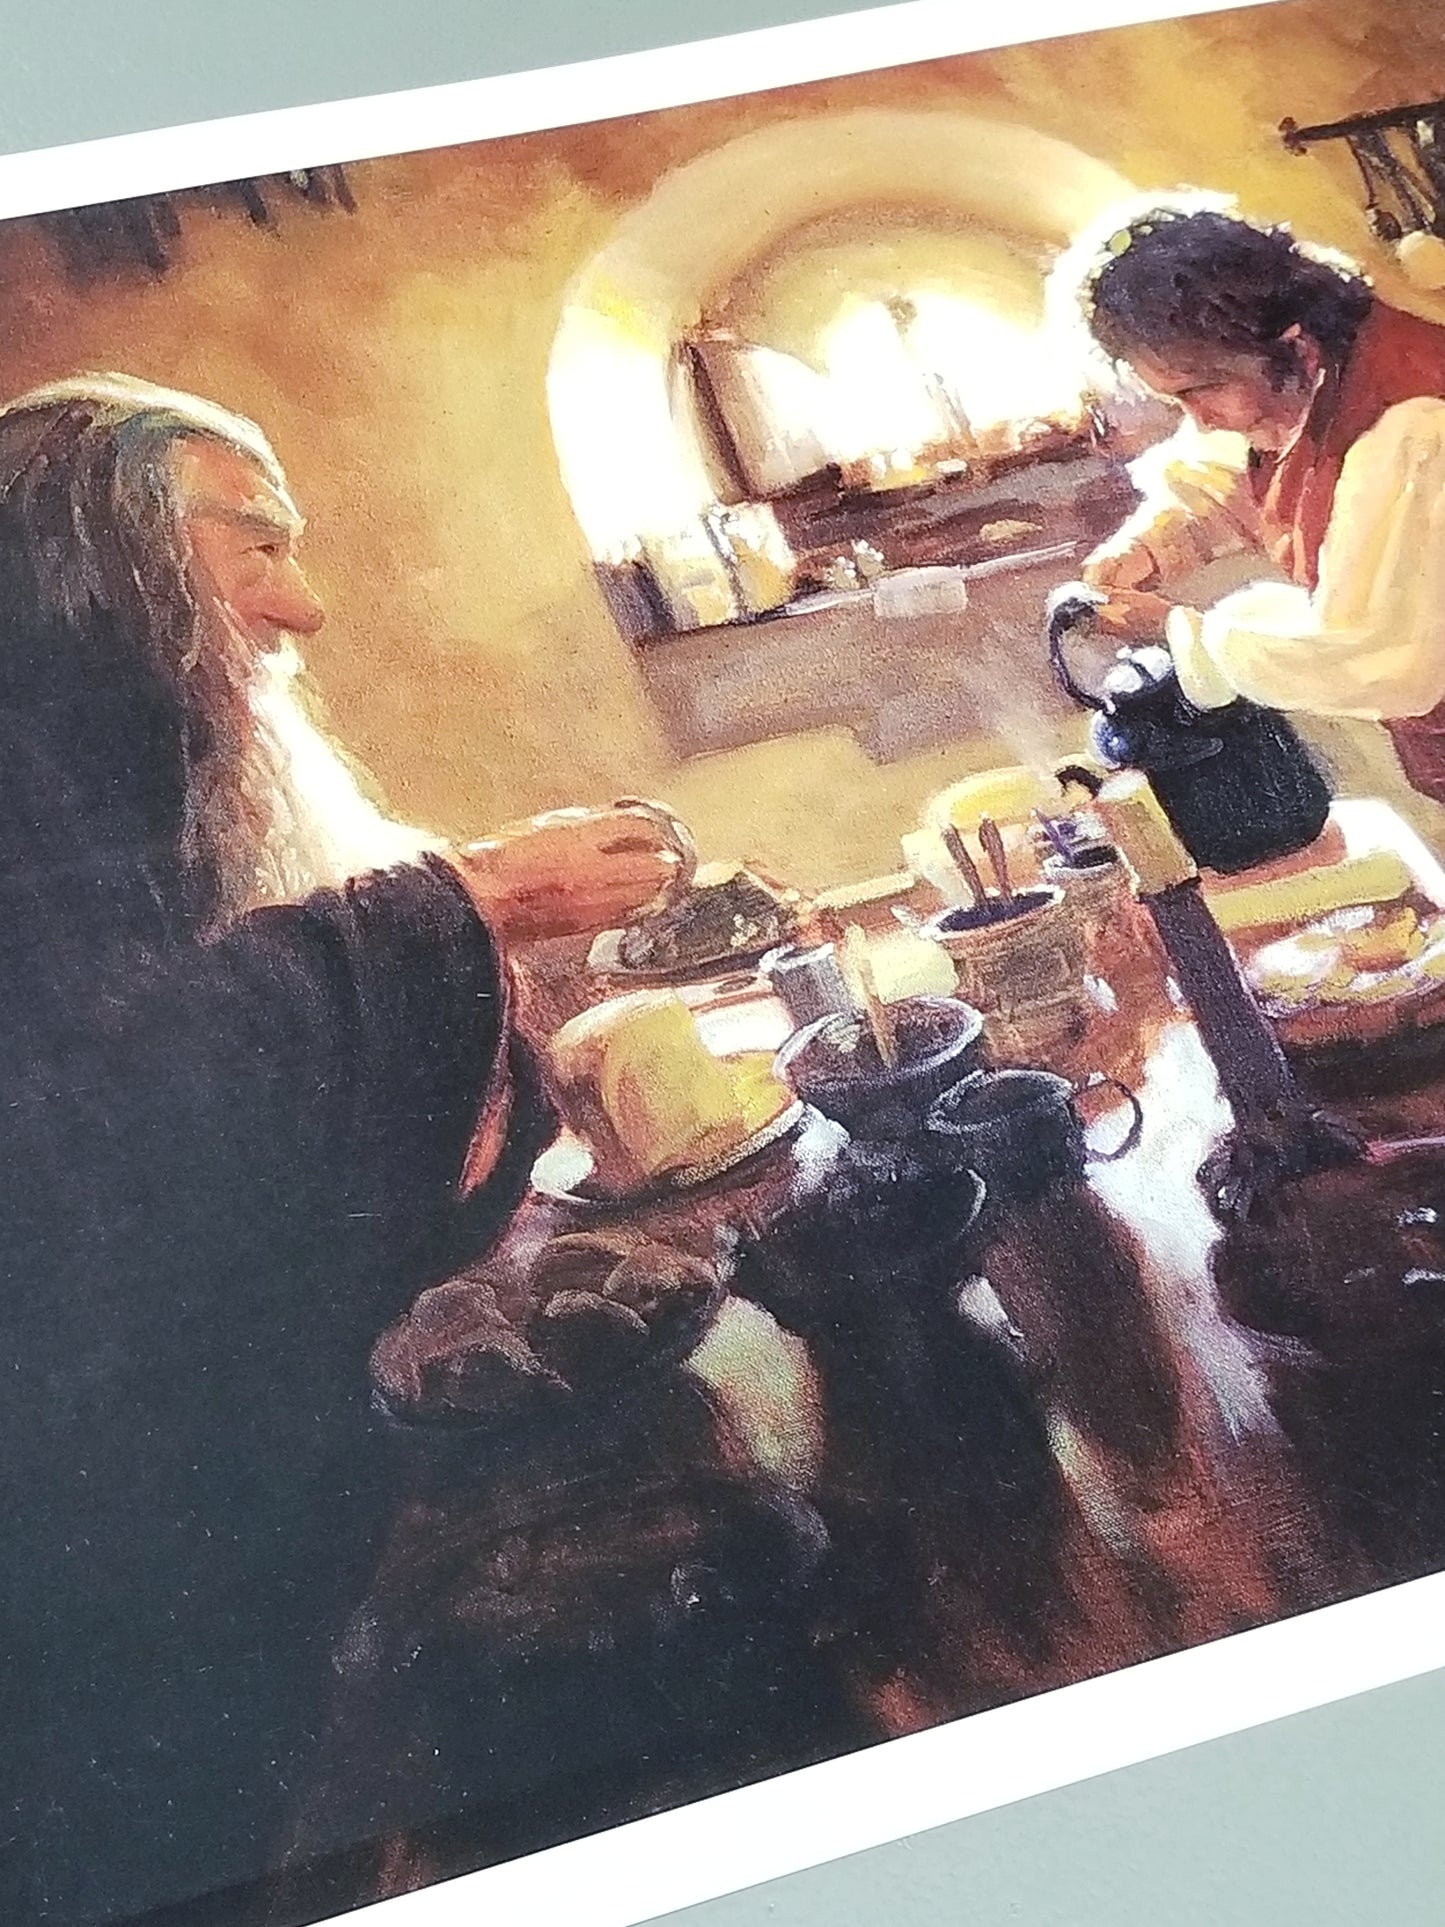 Load image into Gallery viewer, Gandalf and Bilbo Having Tea at Bag End (Lord of the Rings) Premium Art Print
